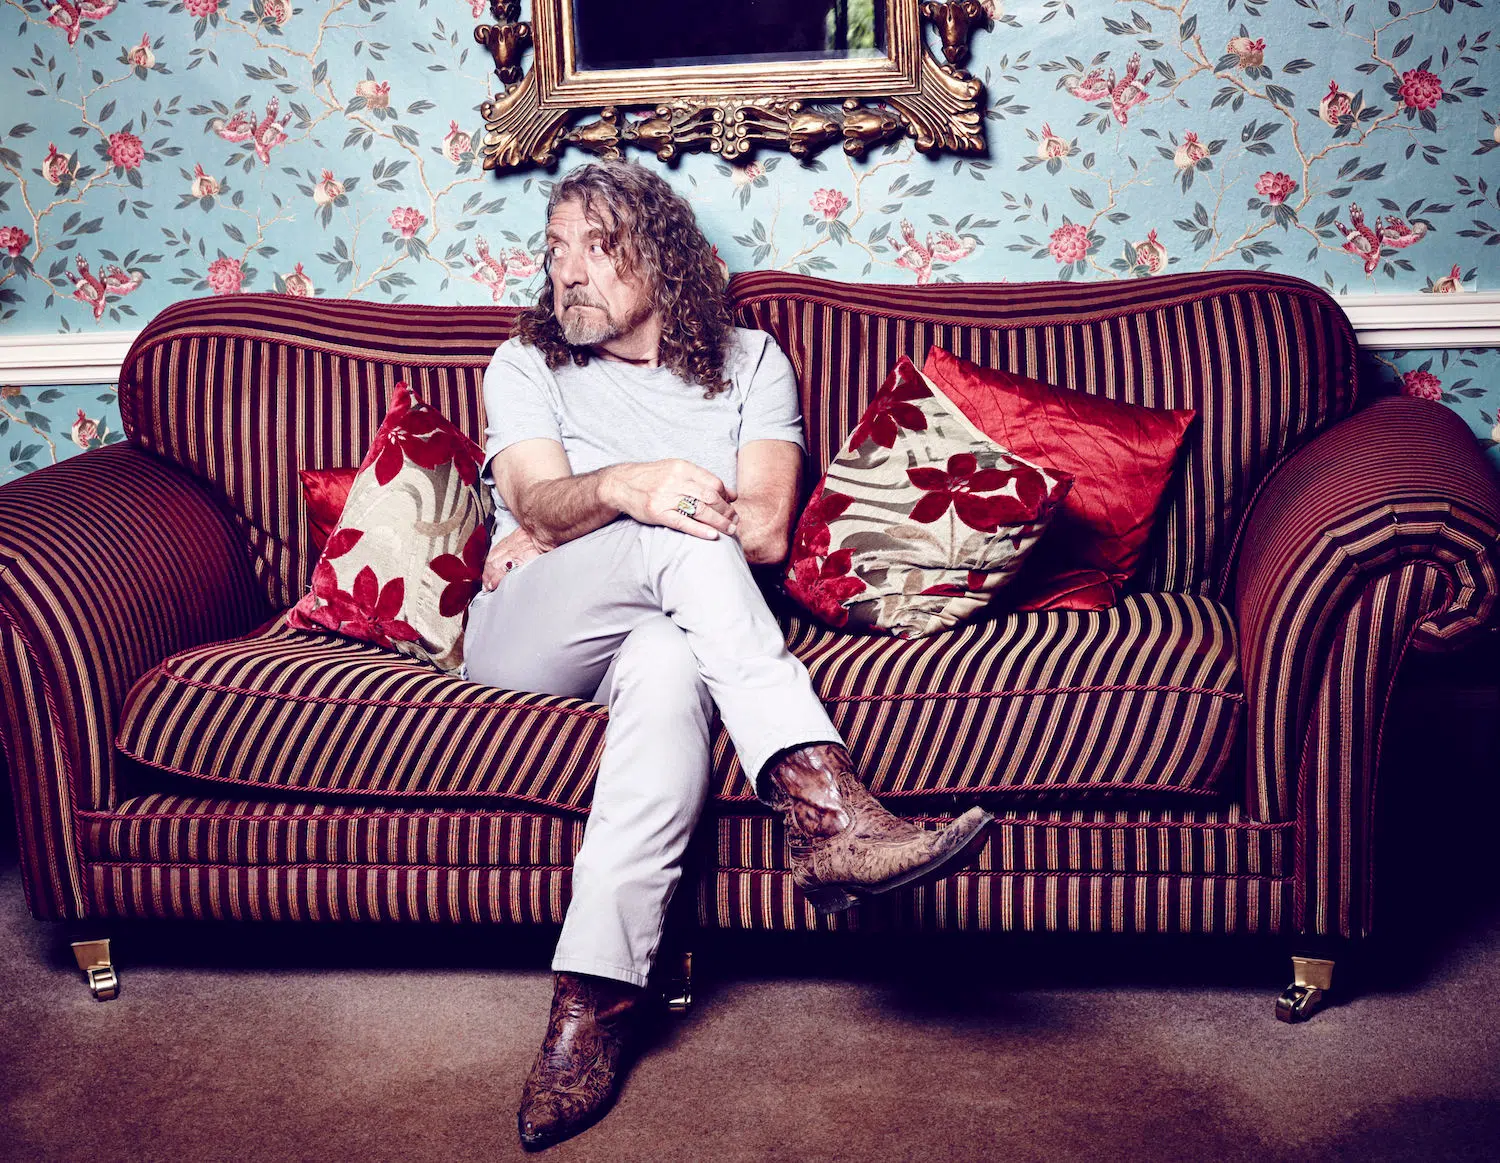 Robert Plant To Participate In Facebook Chat Tomorrow Morning, September 9